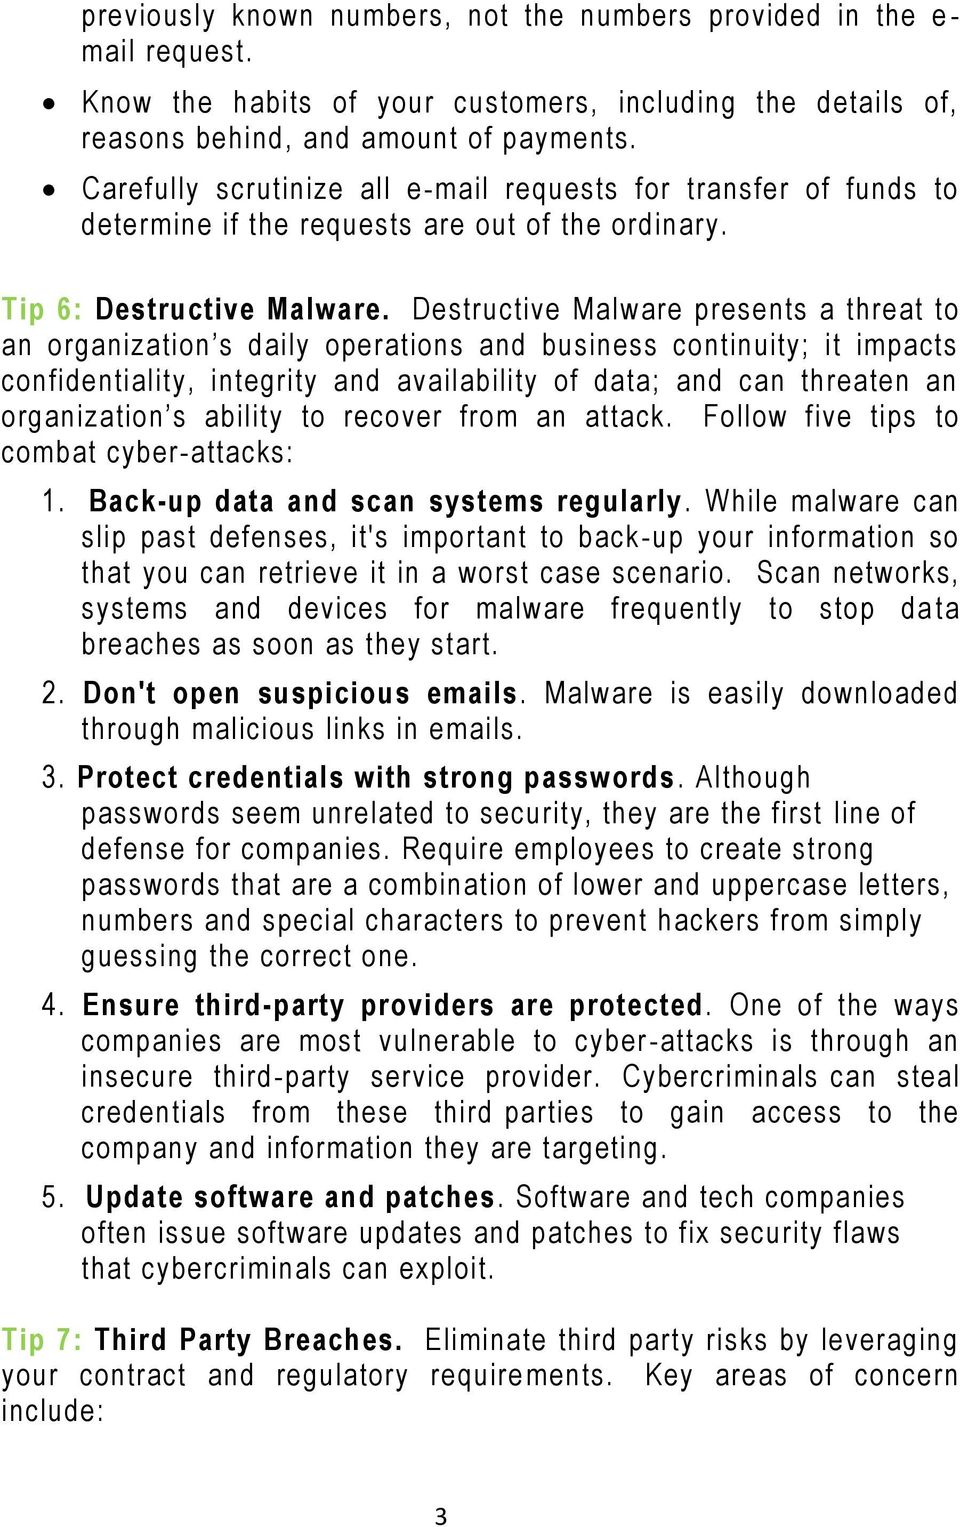 Destructive Malware presents a threat to an organization s daily operations and business continuity; it impacts confidentiality, integrity and availability of data; and can threaten an organization s